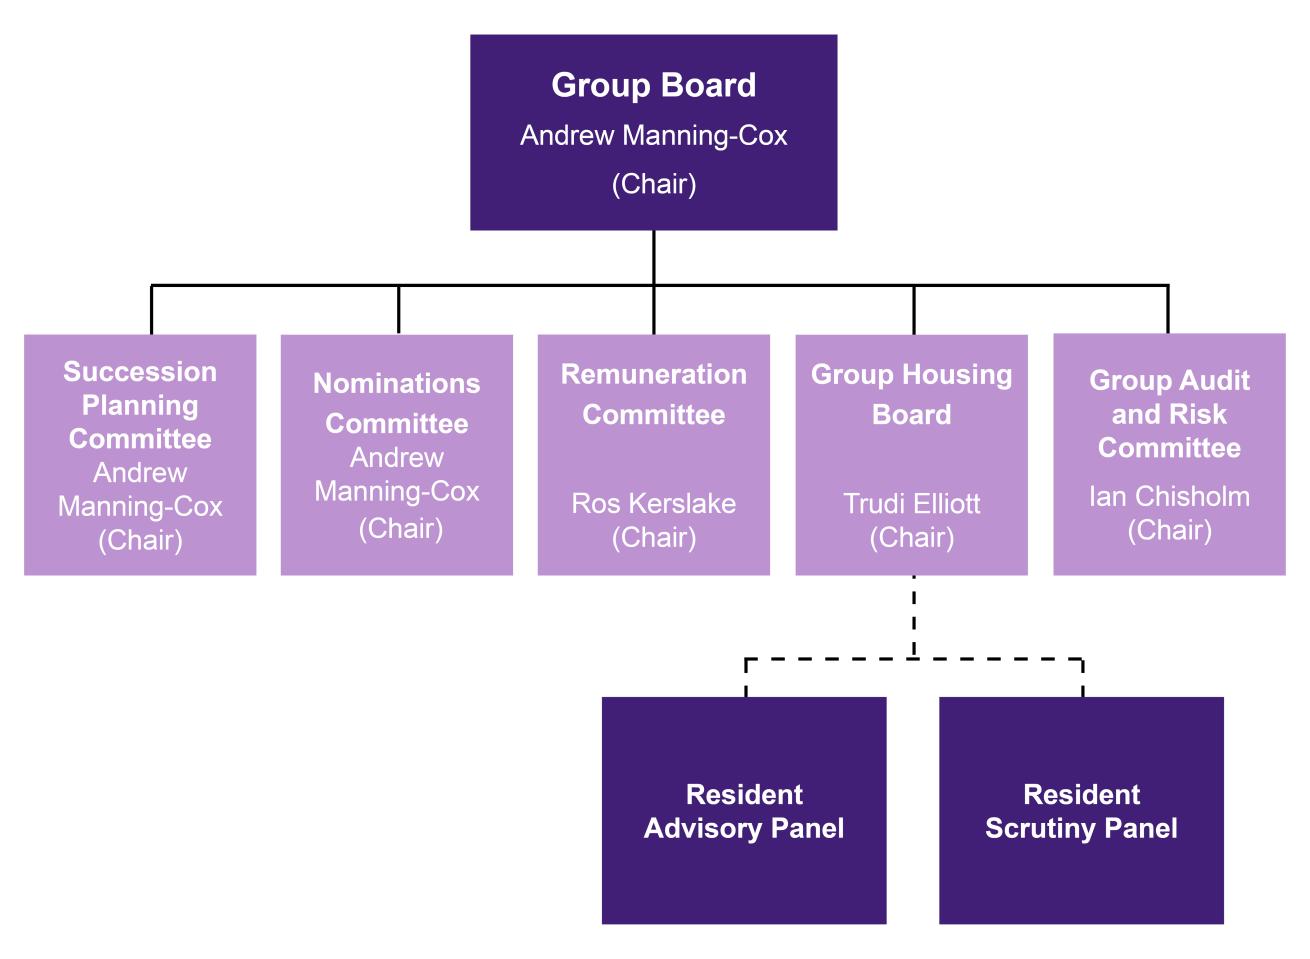 Graphic showing a structure chart with the Group Board at the top, a row of committees below and the resident panels below the Group Housing Board